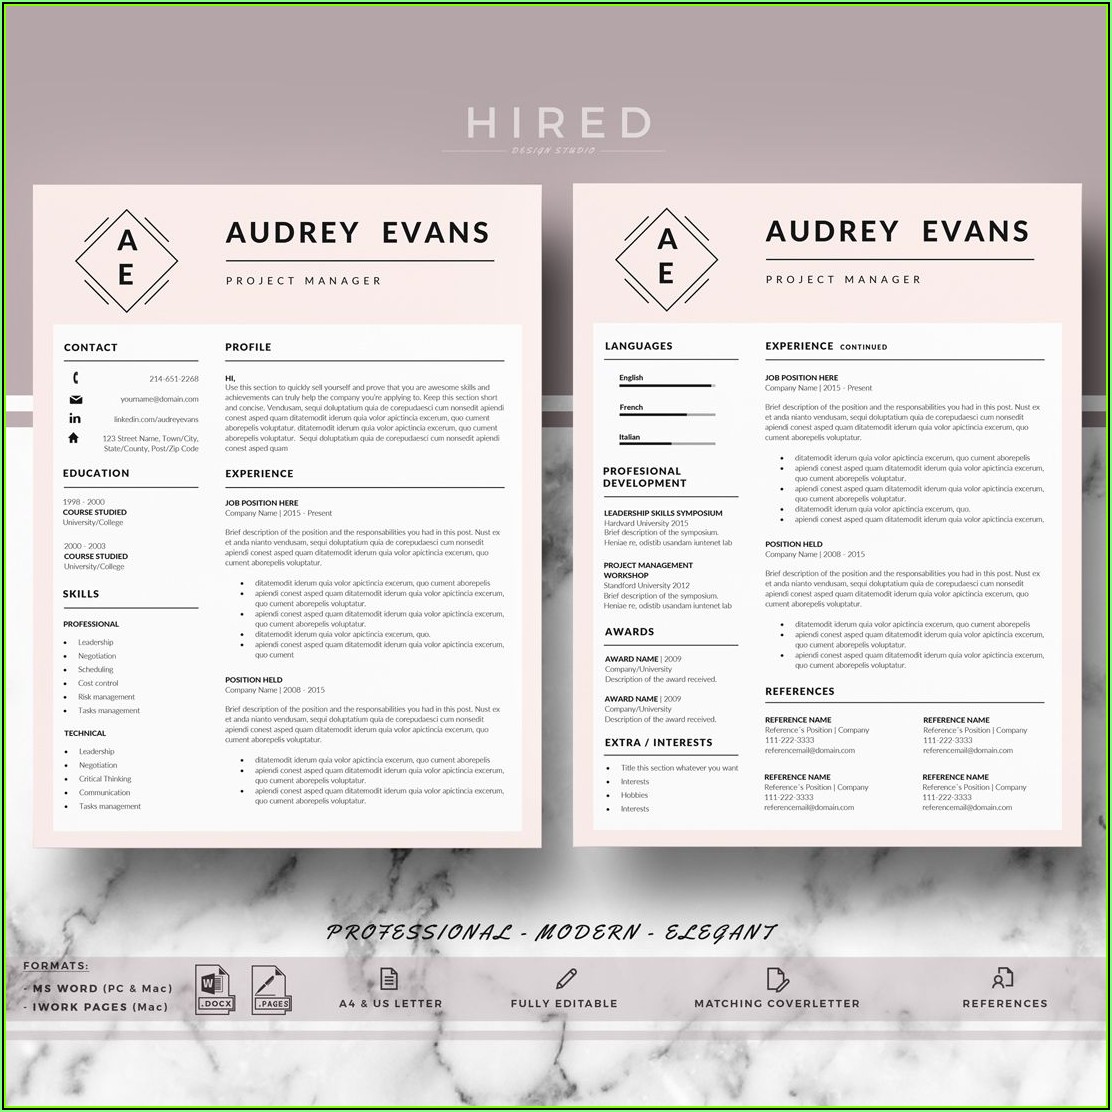 Templates For Professional Resumes